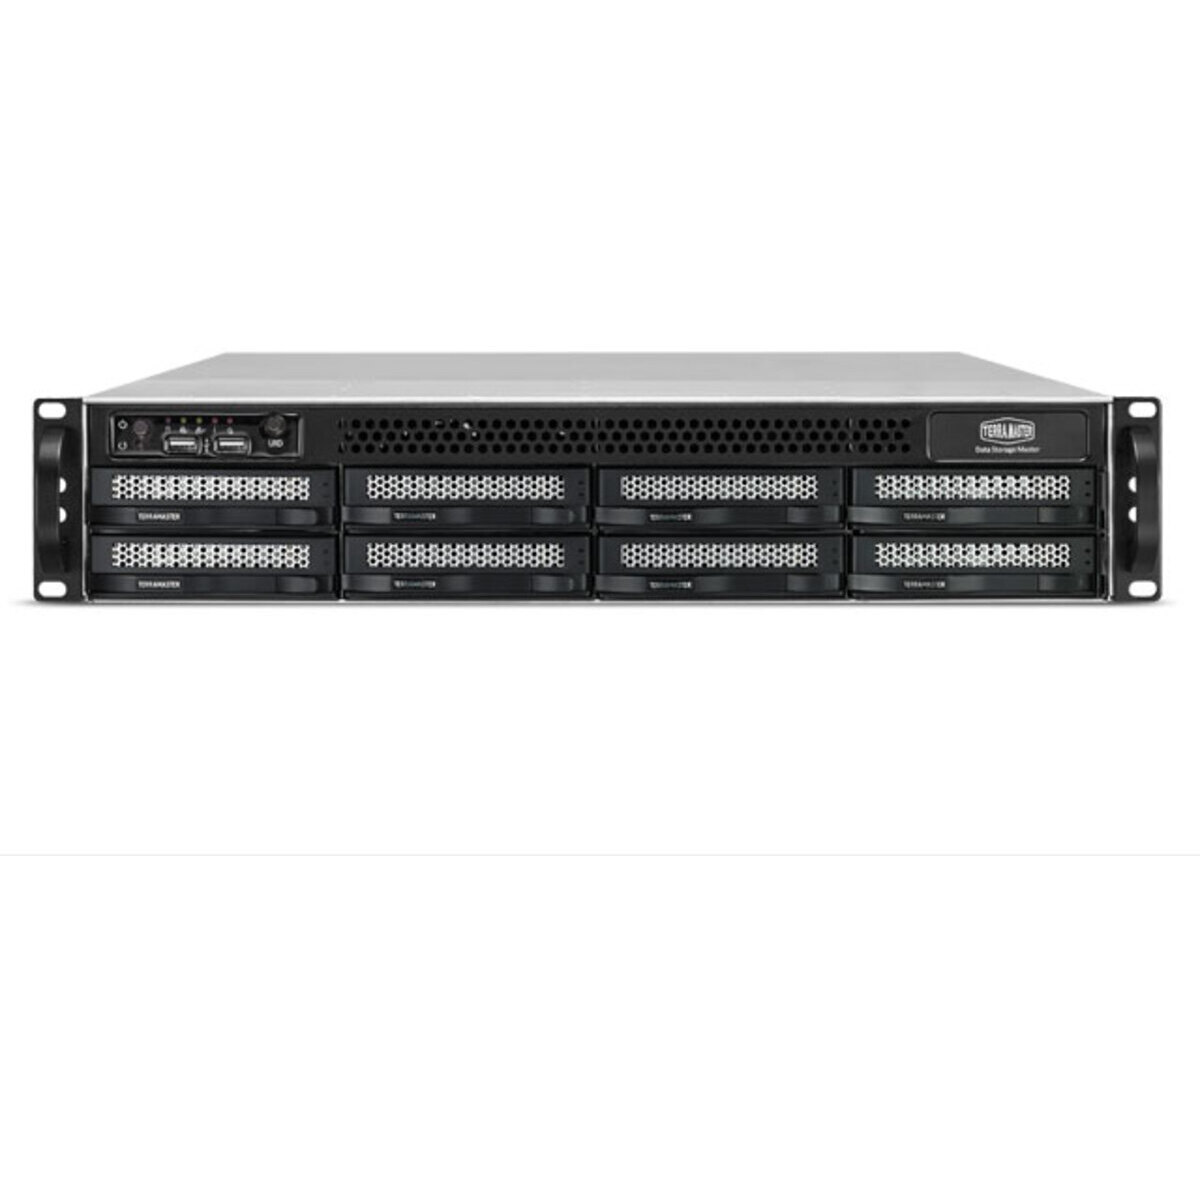 TerraMaster U8-522-9400 8tb 8-Bay RackMount Large Business / Enterprise NAS - Network Attached Storage Device 4x2tb Western Digital Red Pro WD2002FFSX 3.5 7200rpm SATA 6Gb/s HDD NAS Class Drives Installed - Burn-In Tested U8-522-9400